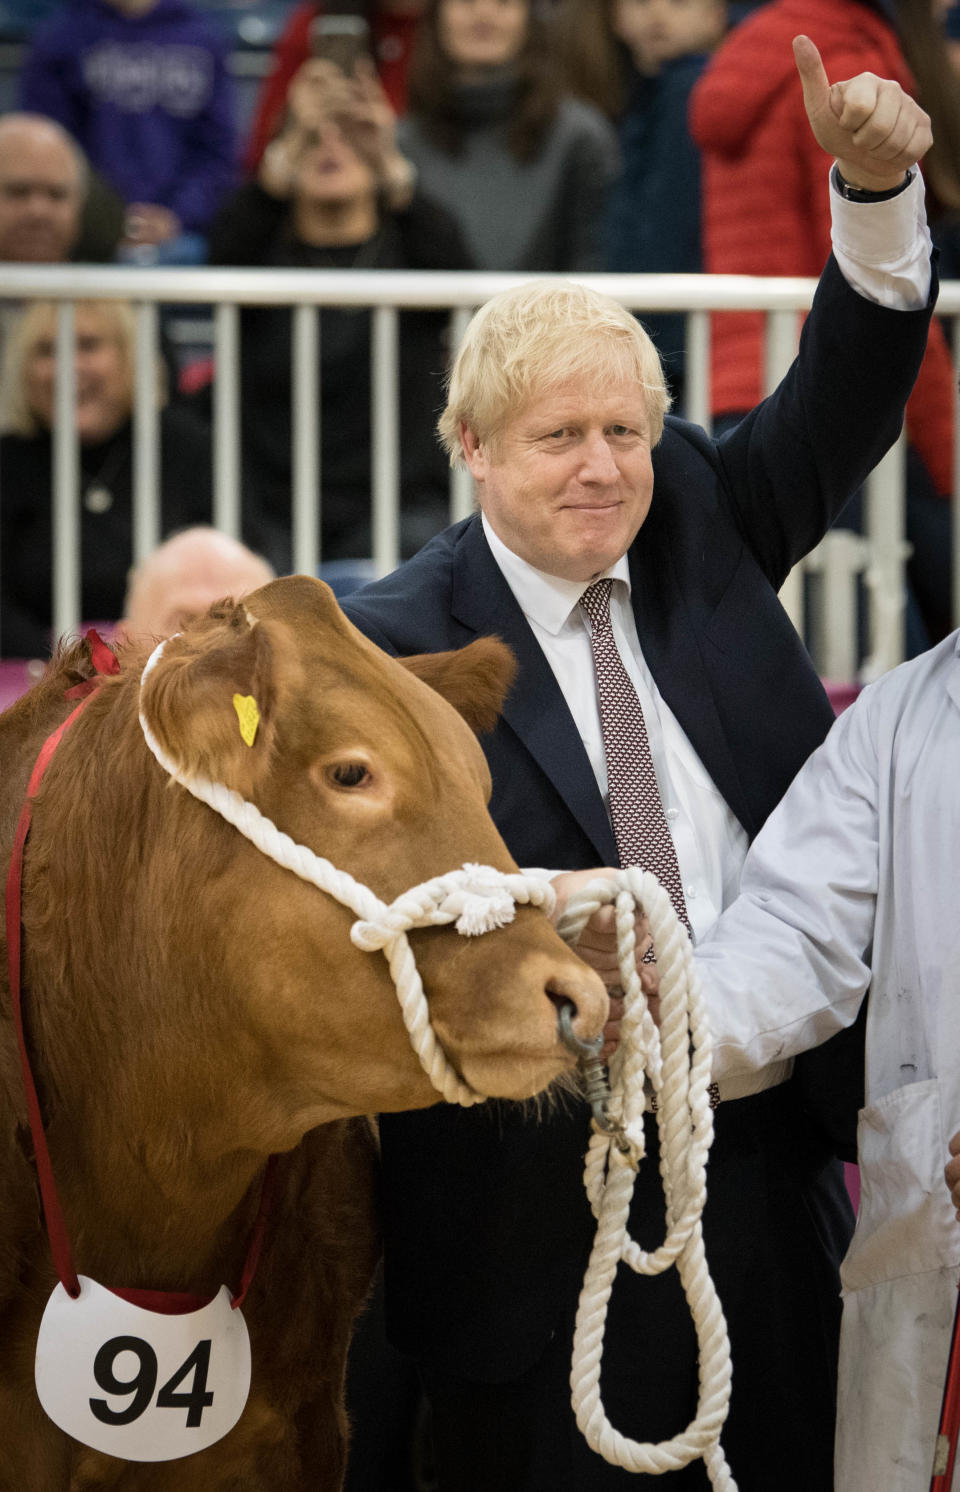  Prime Minister Boris Johnson, visits the Royal Welsh Winter Fair, in Llanelwedd, Builth Wells
whilst on the General Election campaign trail. PA Photo. Picture date: Monday November 25, 2019. See PA story POLITICS Election. Photo credit should read: Stefan Rousseau/PA Wire 